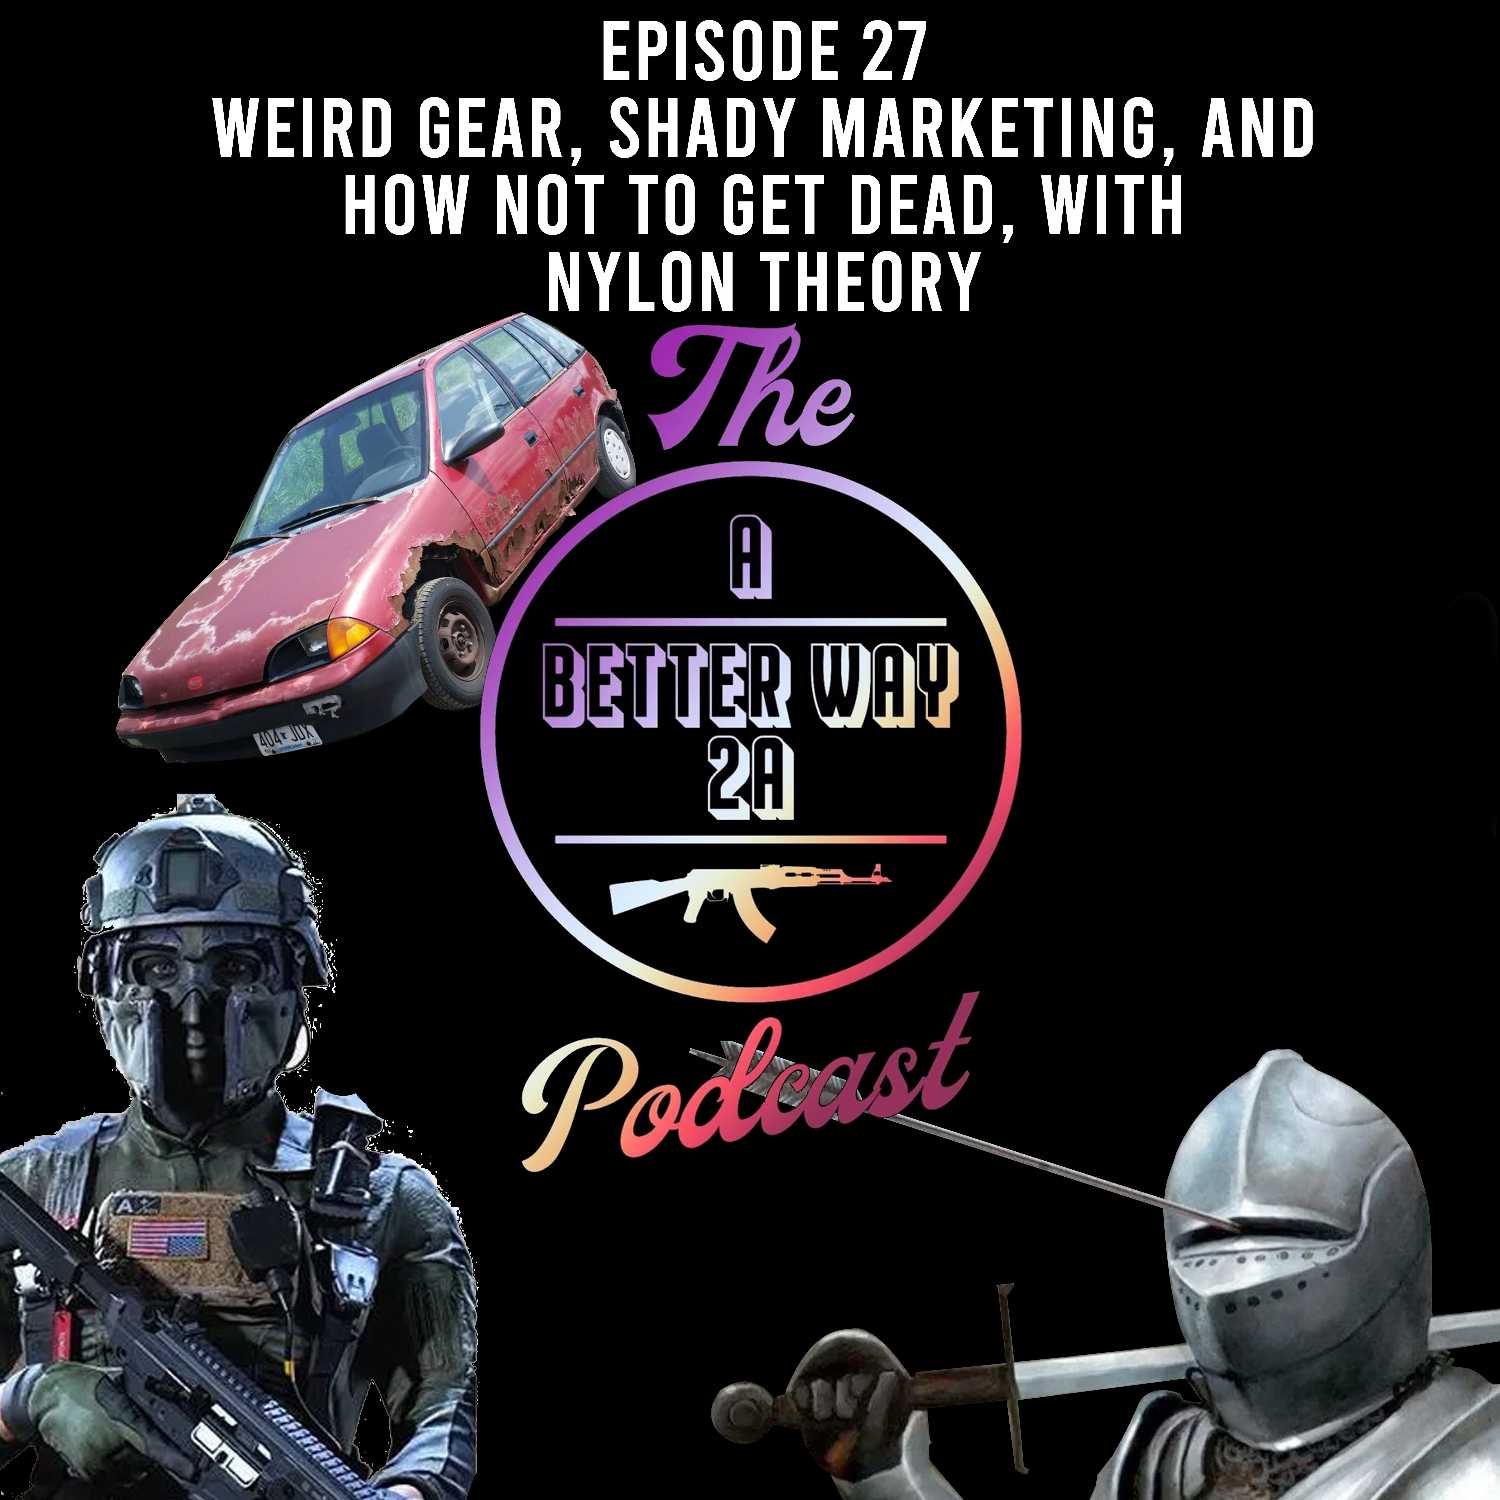 Episode 27 - Weird Gear, Shady Marketing, and How Not To Get Dead, with Nylon Theory